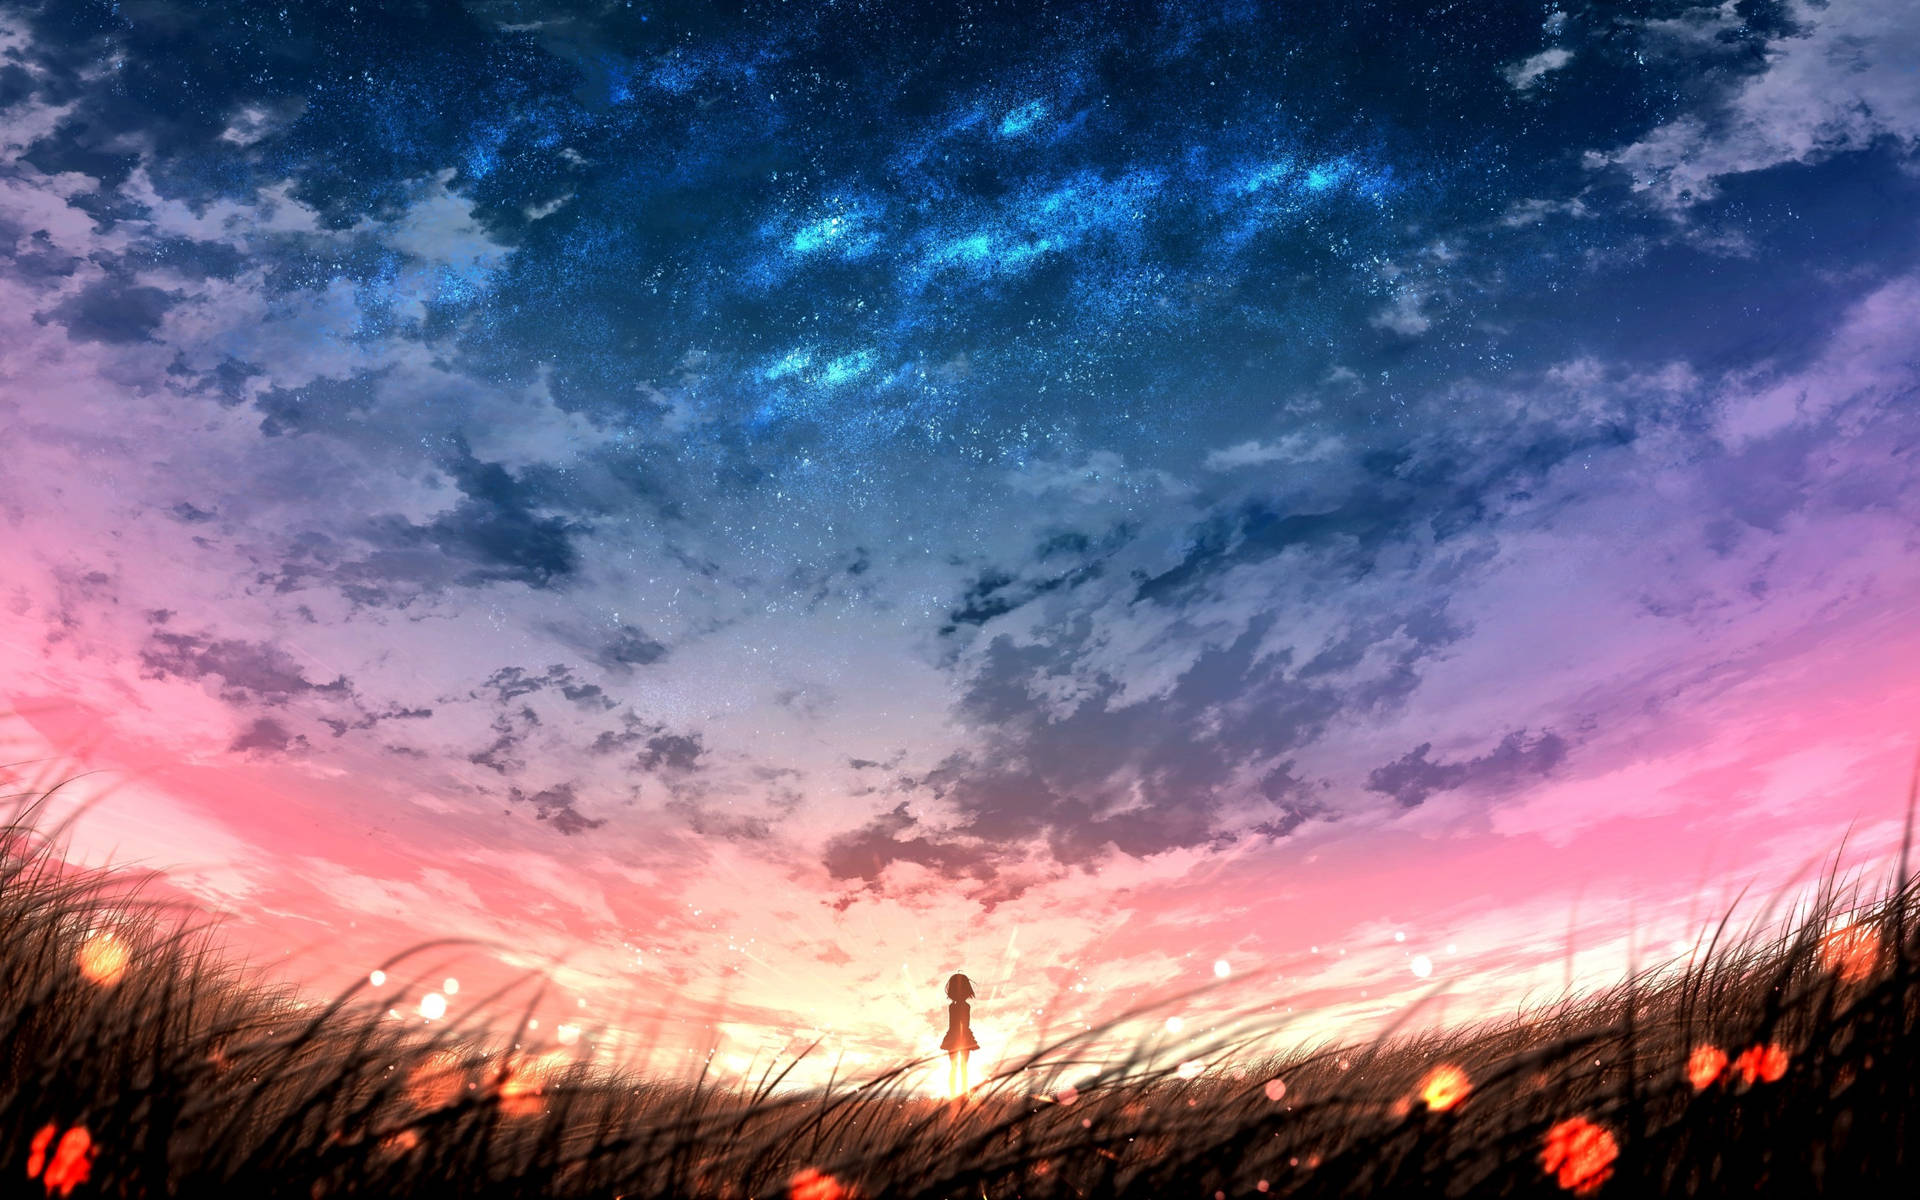 Sunset Sky With Galaxy